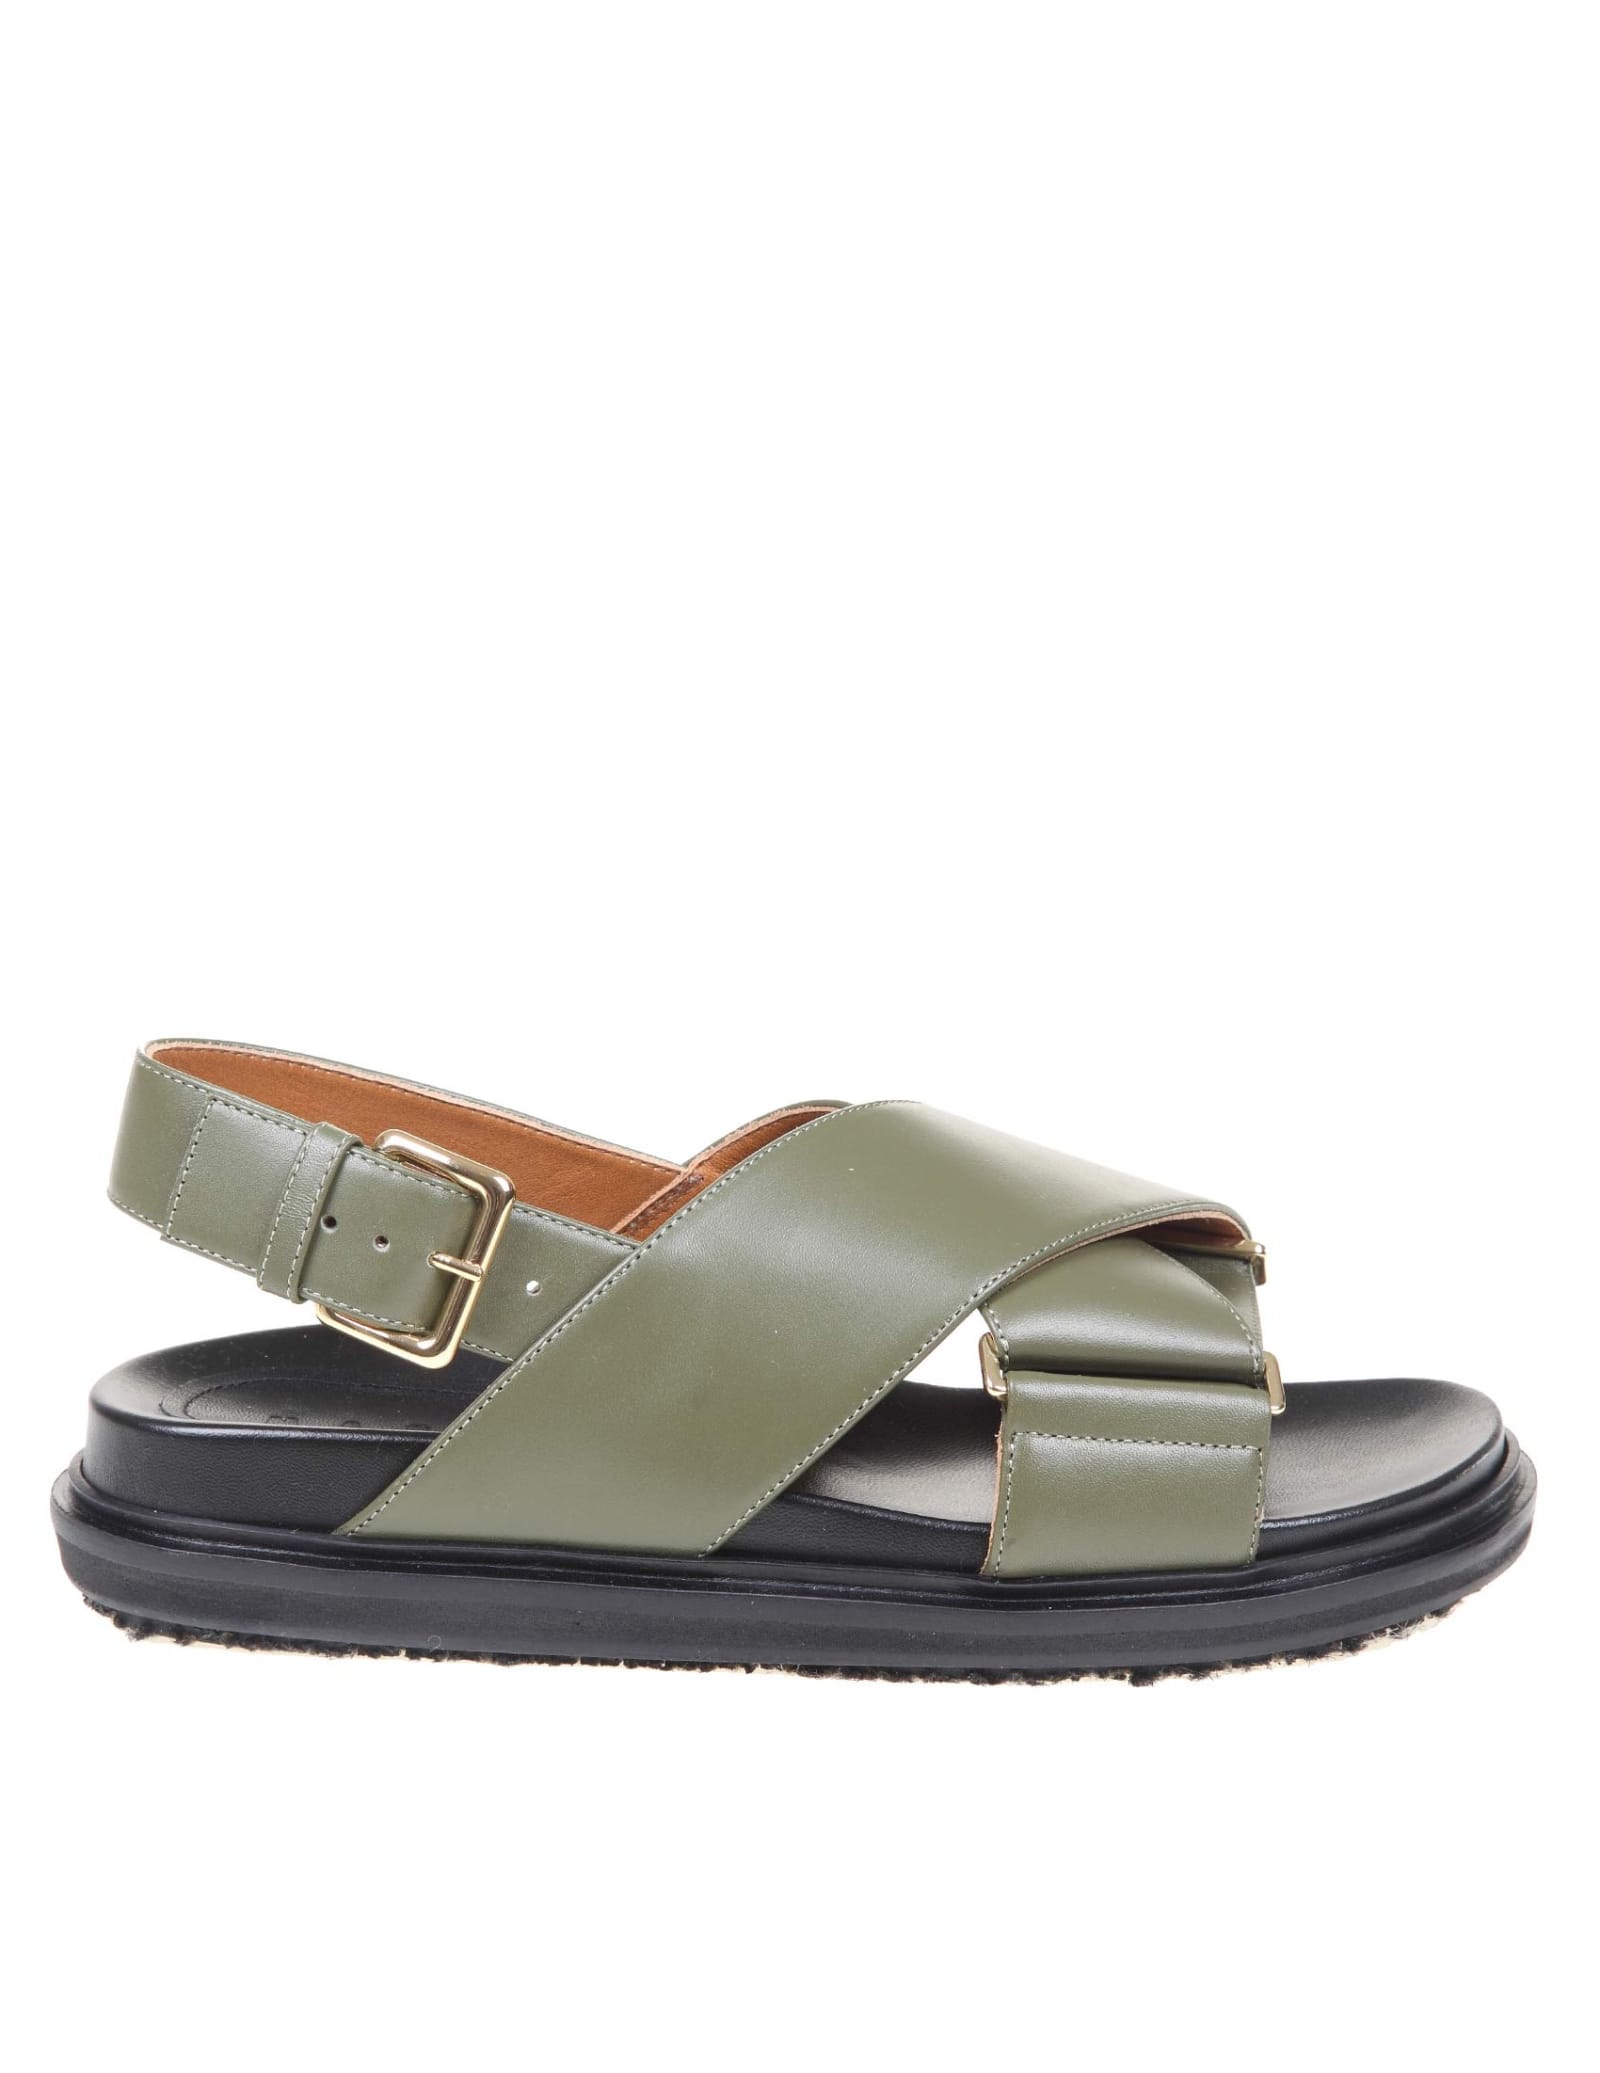 Buy Marni Fussbett Sandal In Green Leather online, shop Marni shoes with free shipping